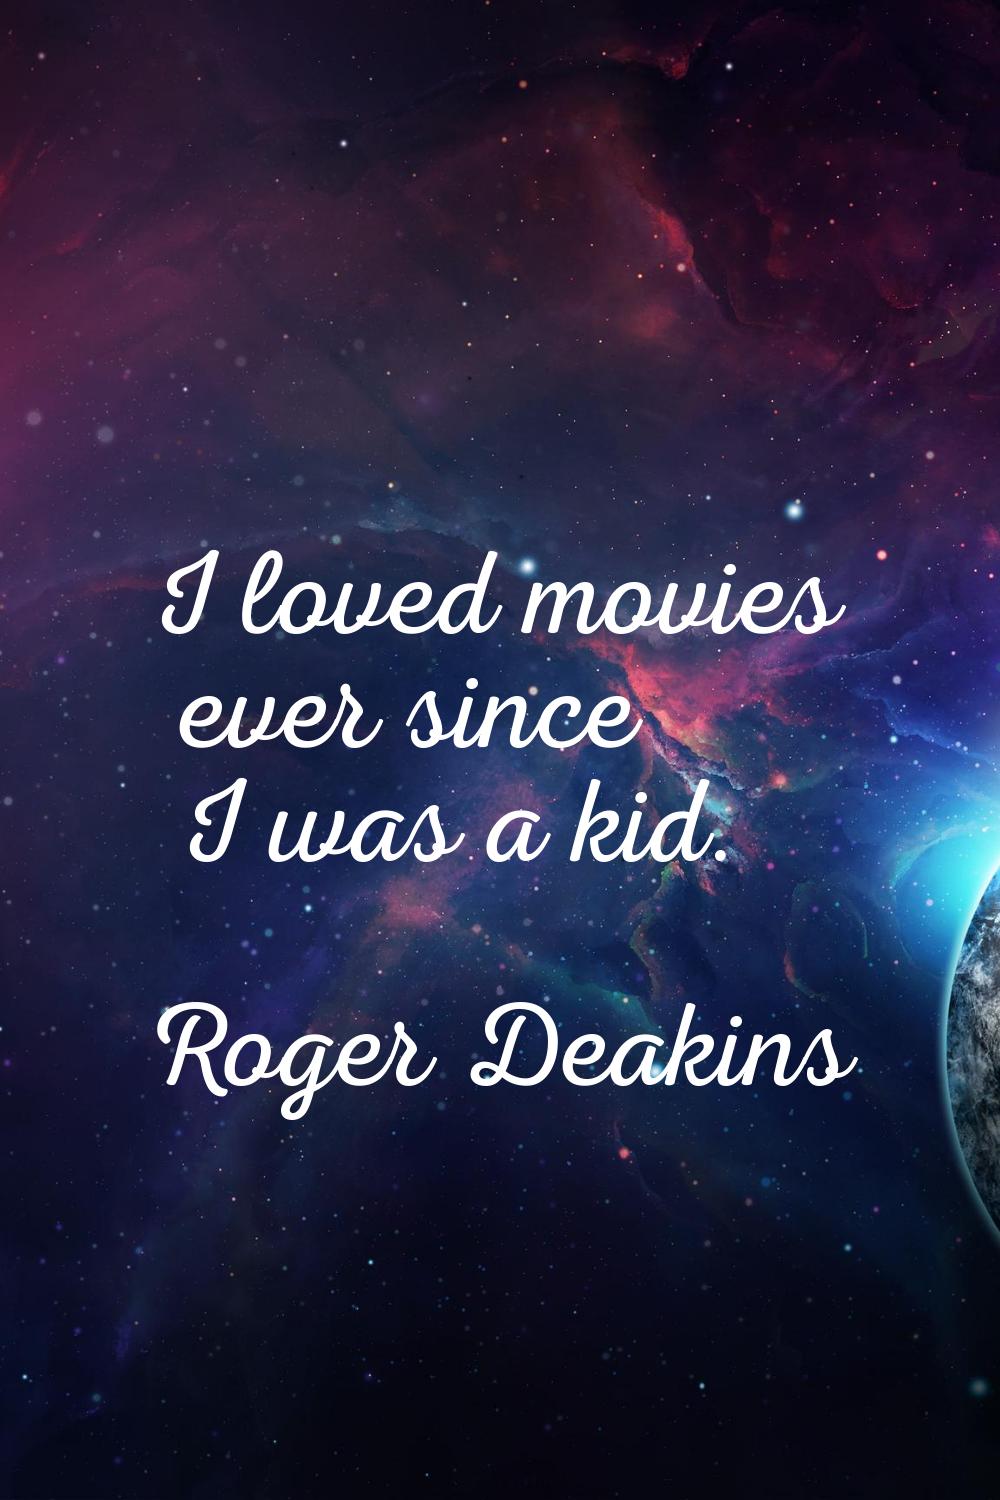 I loved movies ever since I was a kid.